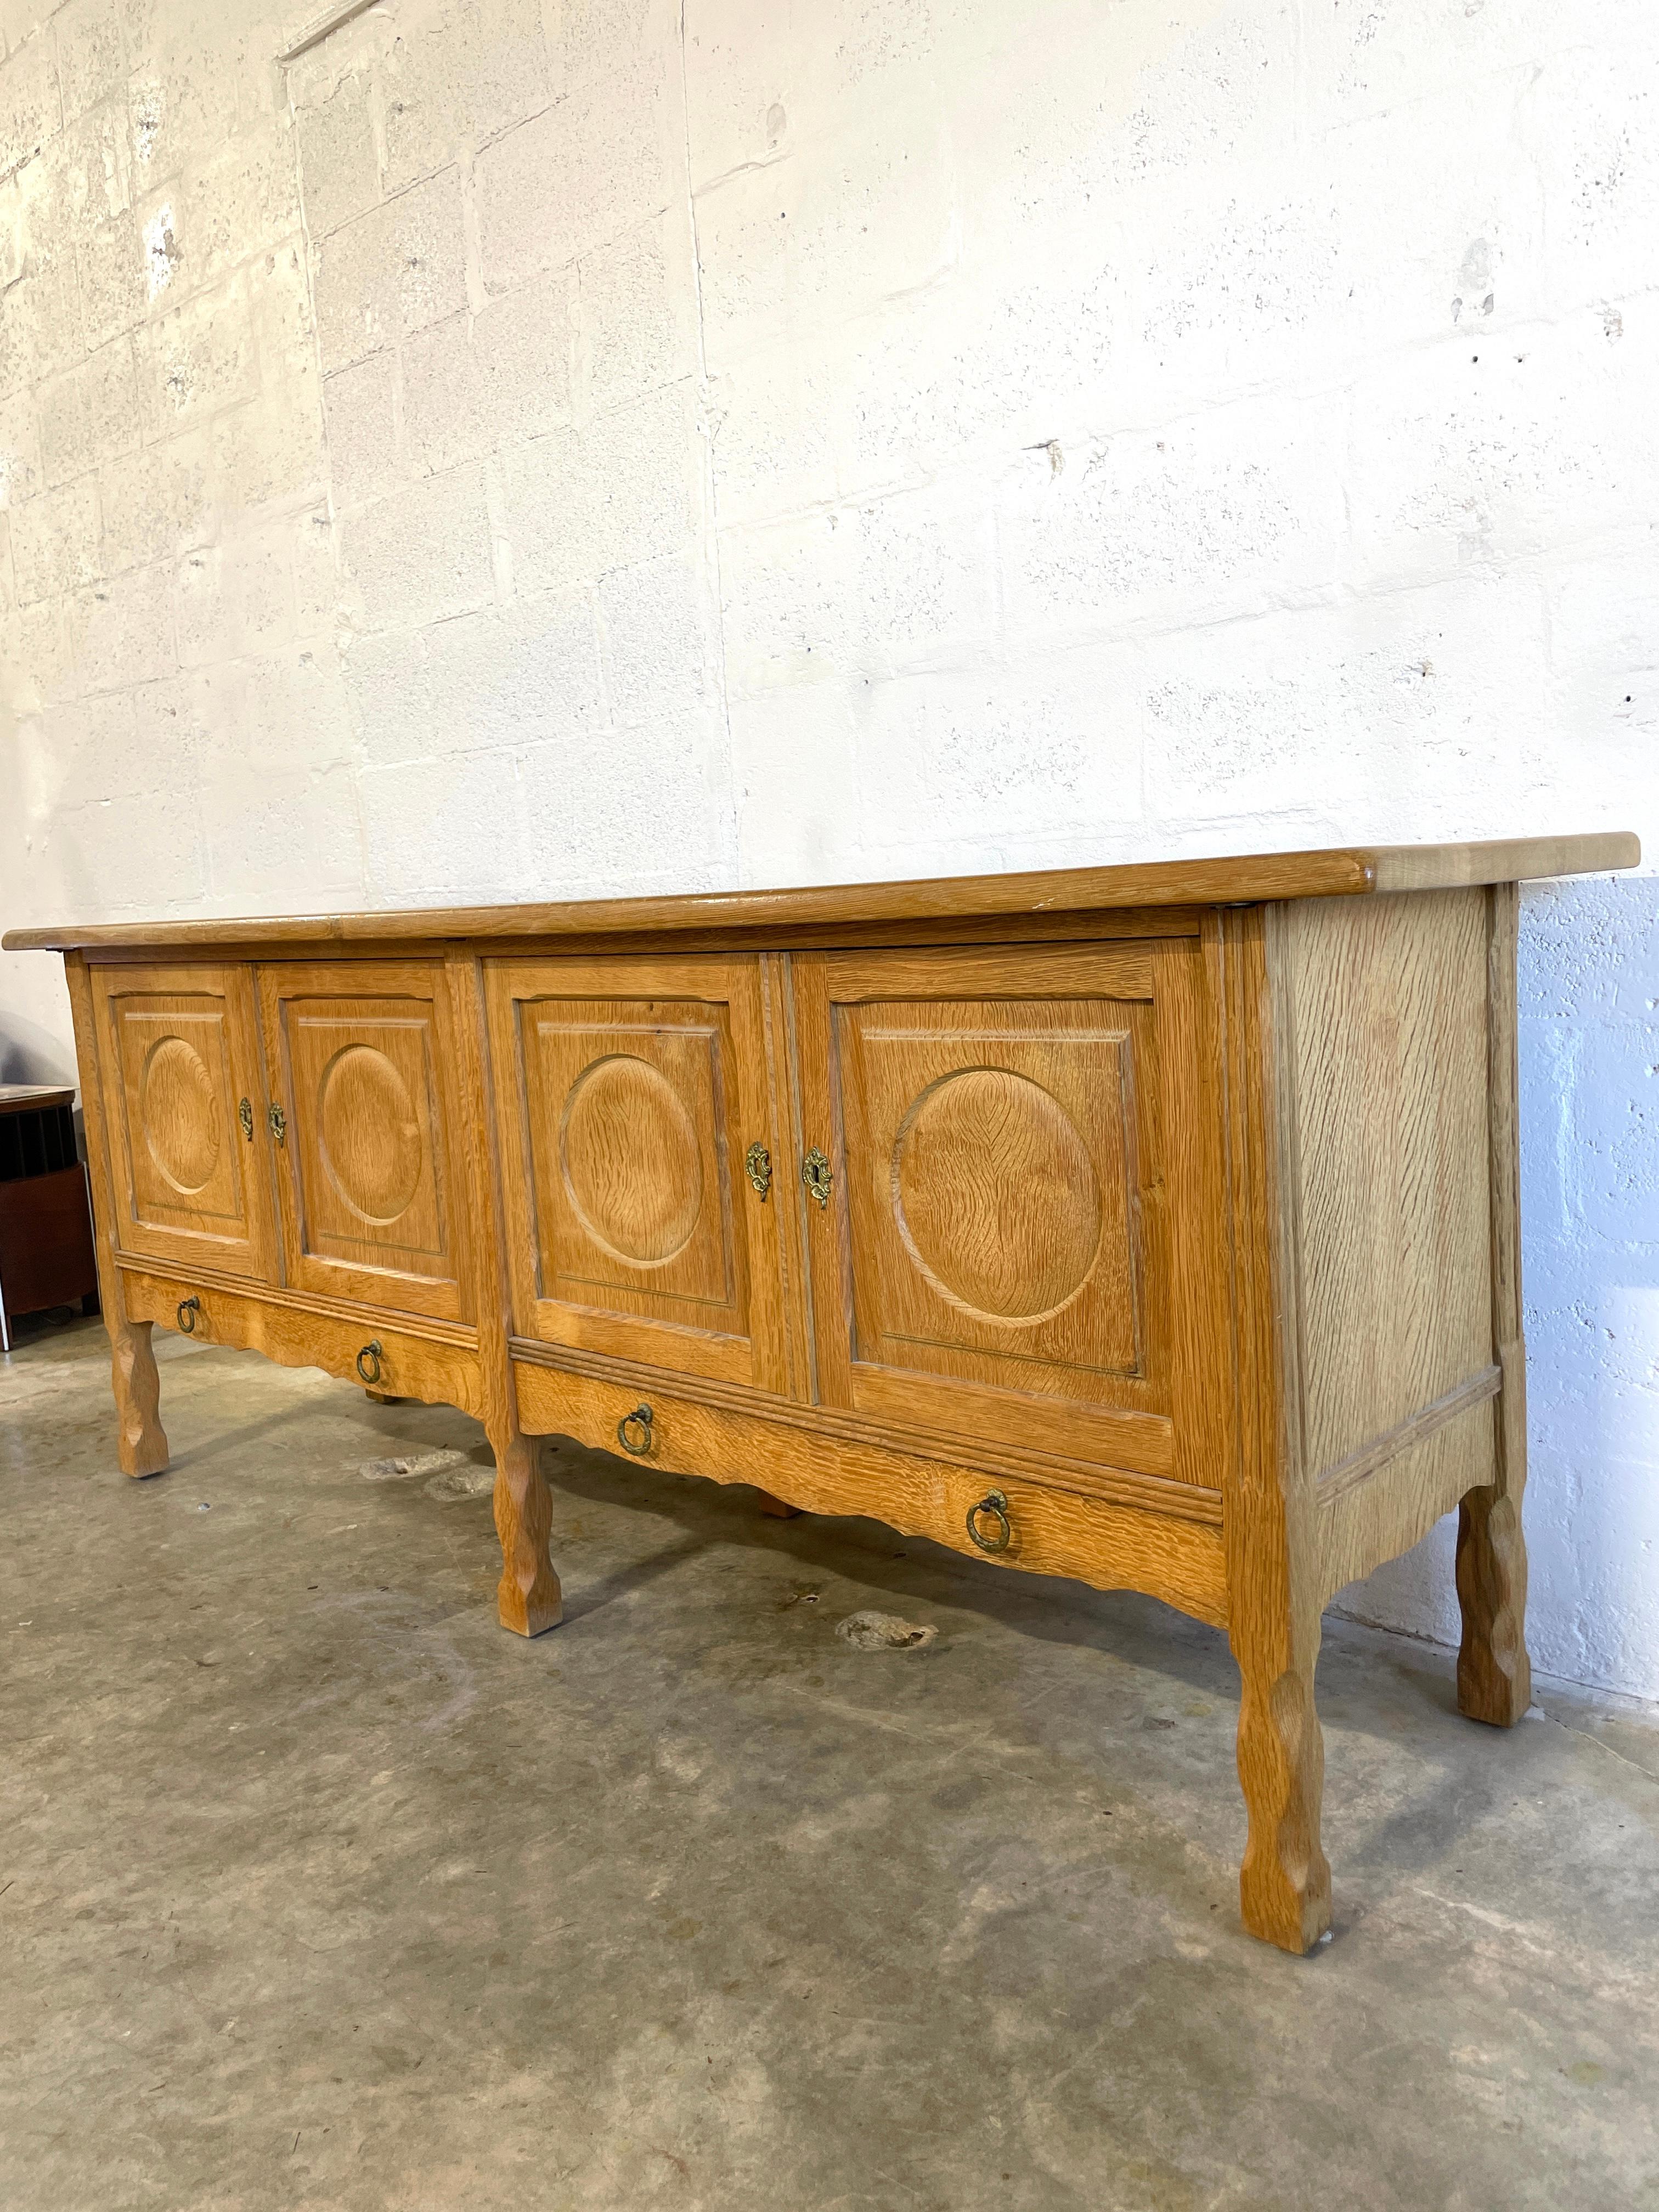 Stunning Henning Kjaernulf attrib. Danish Oak Rustic or Primitive Credenza or Console. 78.75w 20d 31h. Imported from Denmark.
